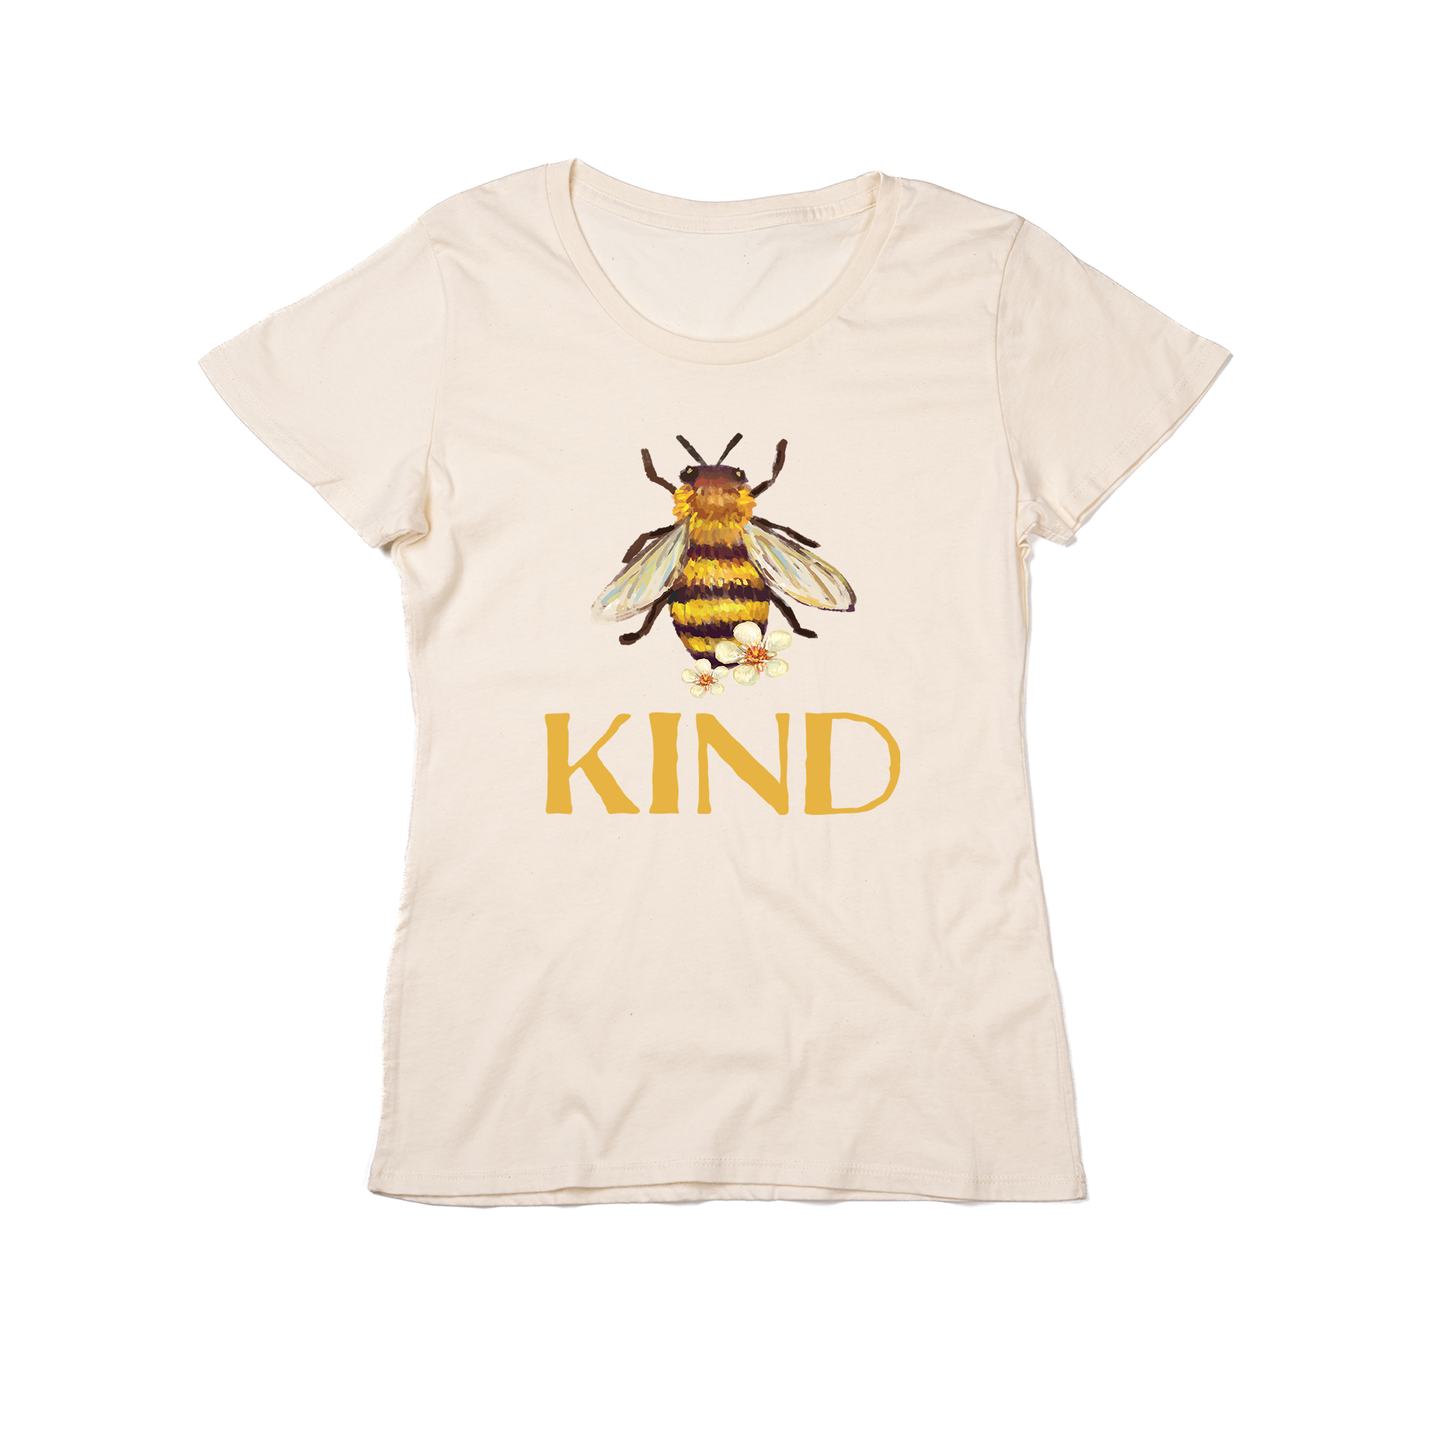 Bee Kind (Across Front) - Women's Fitted Tee (Natural)